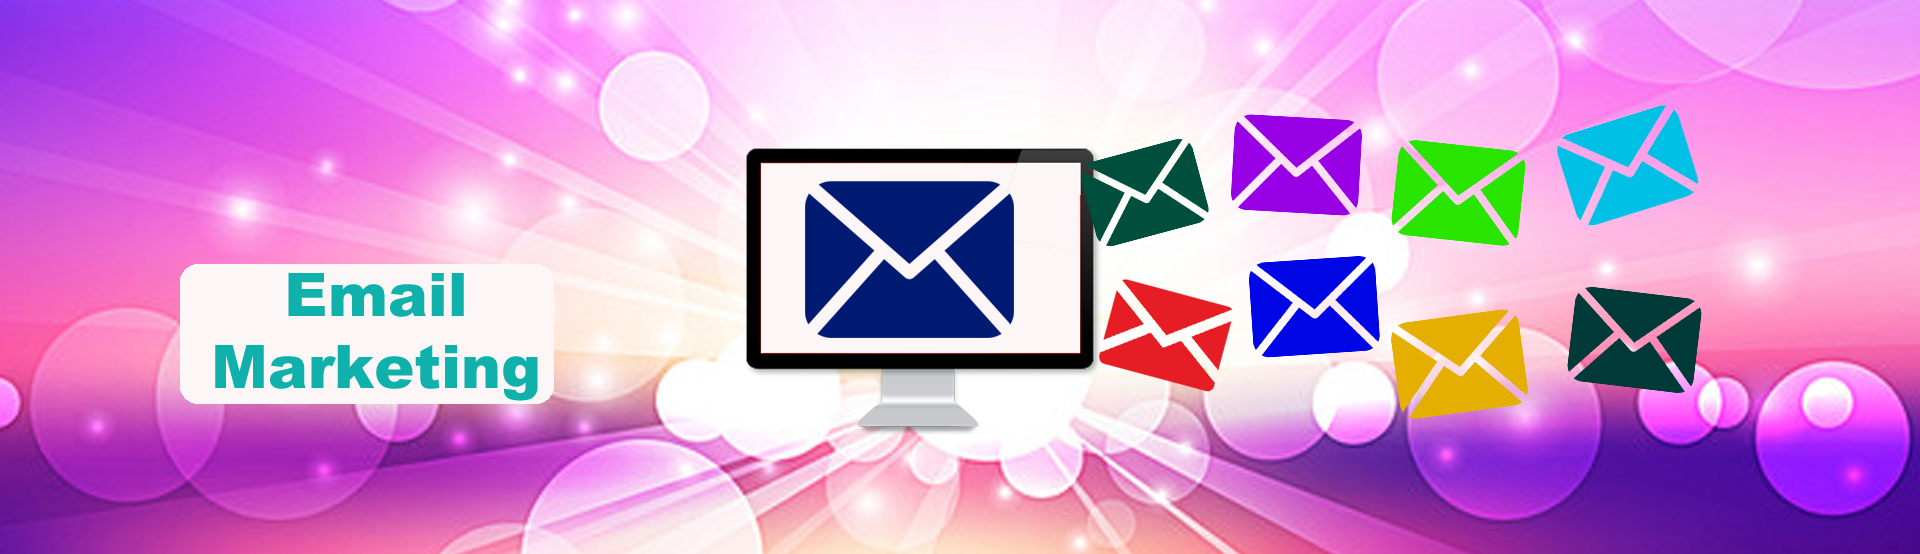 EMAIL MARKETING BANNER